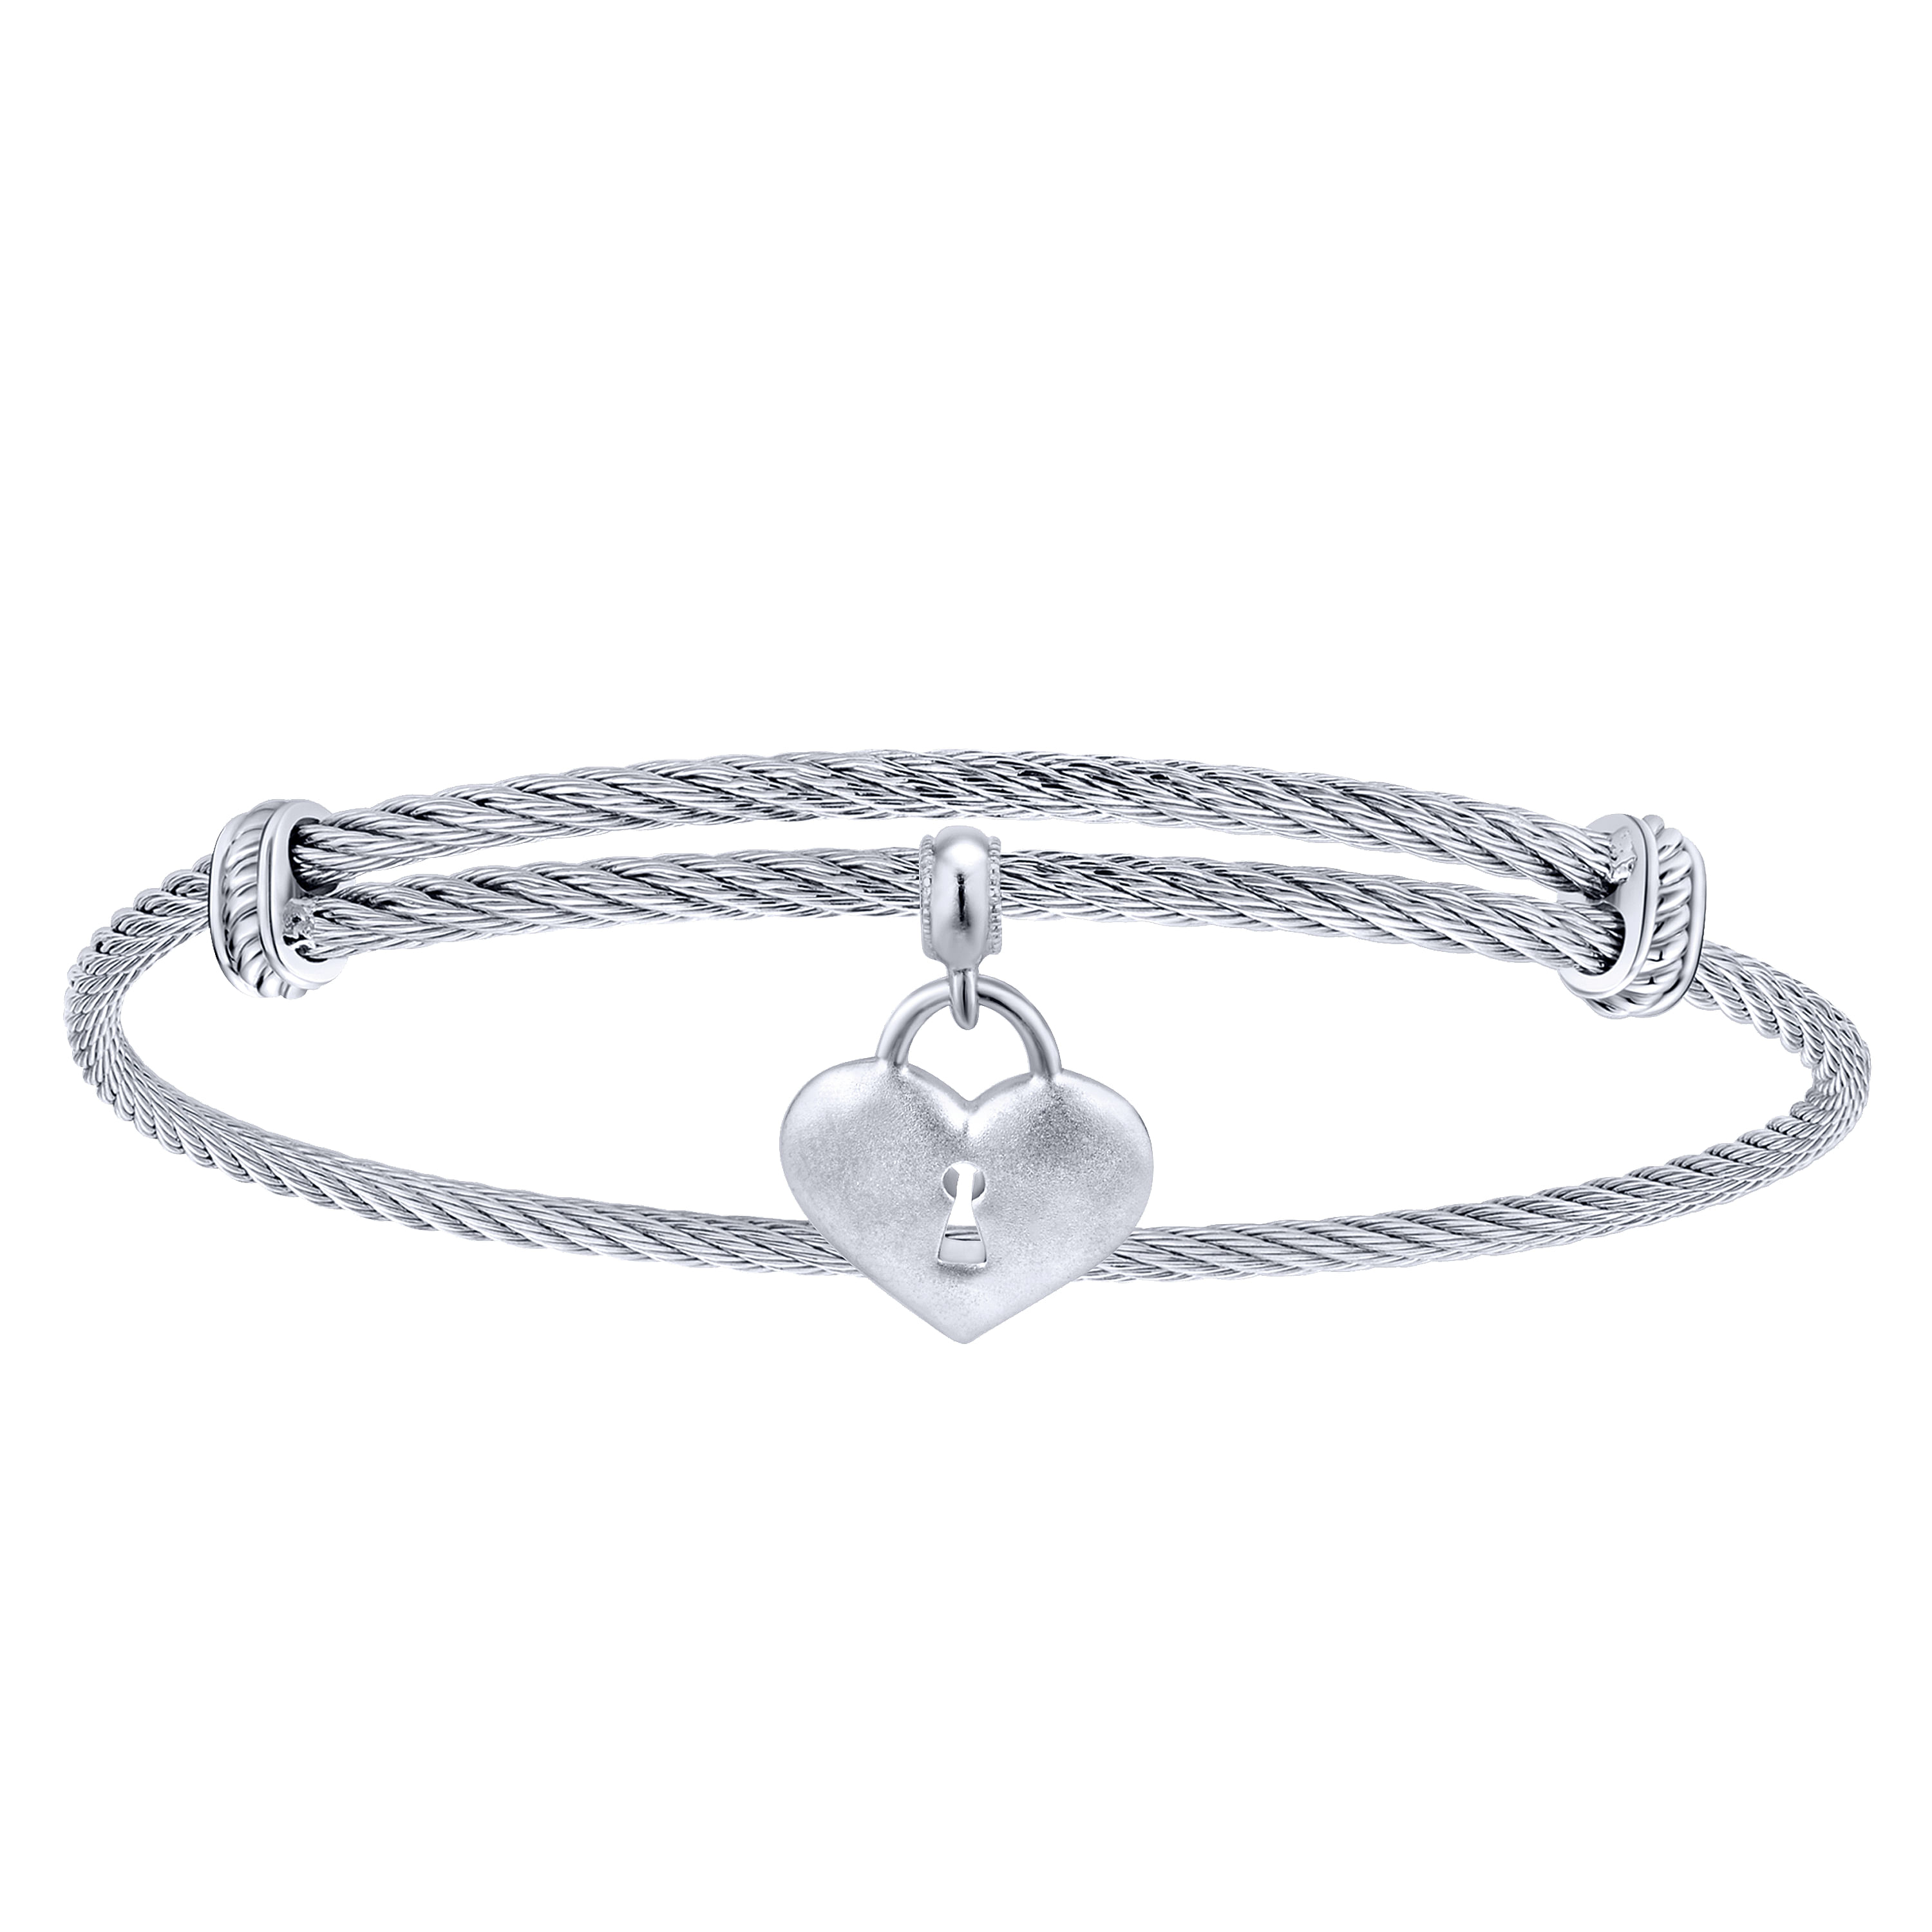 Adjustable Twisted Cable Stainless Steel Bangle with Sterling Silver Heart Lock Charm